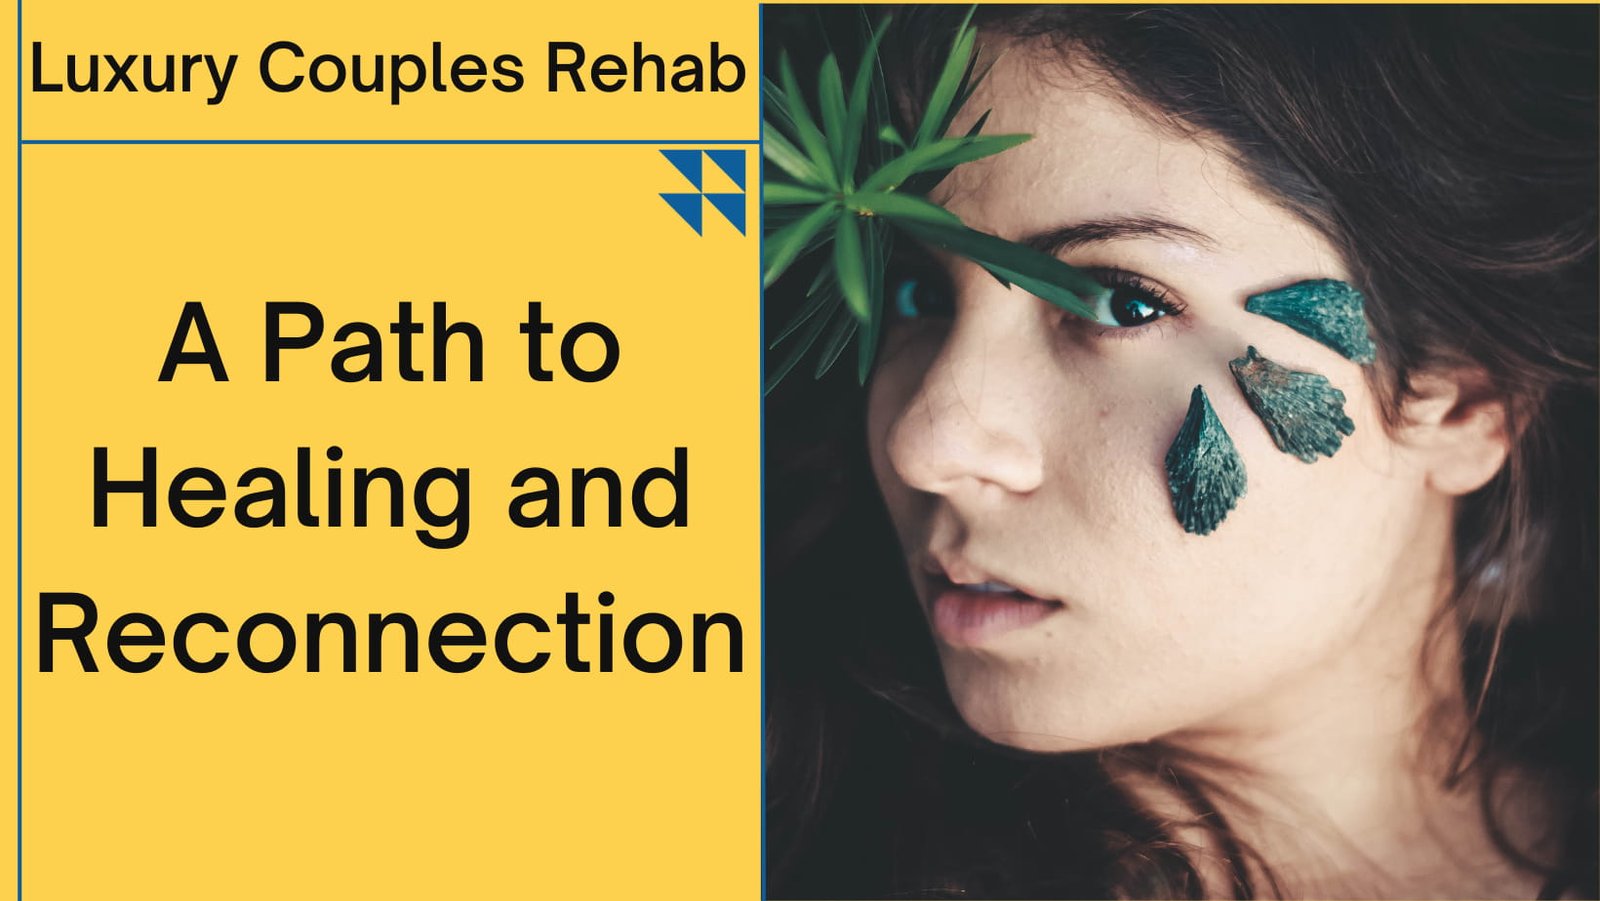 Luxury Couples Rehab: A Path to Healing and Reconnection